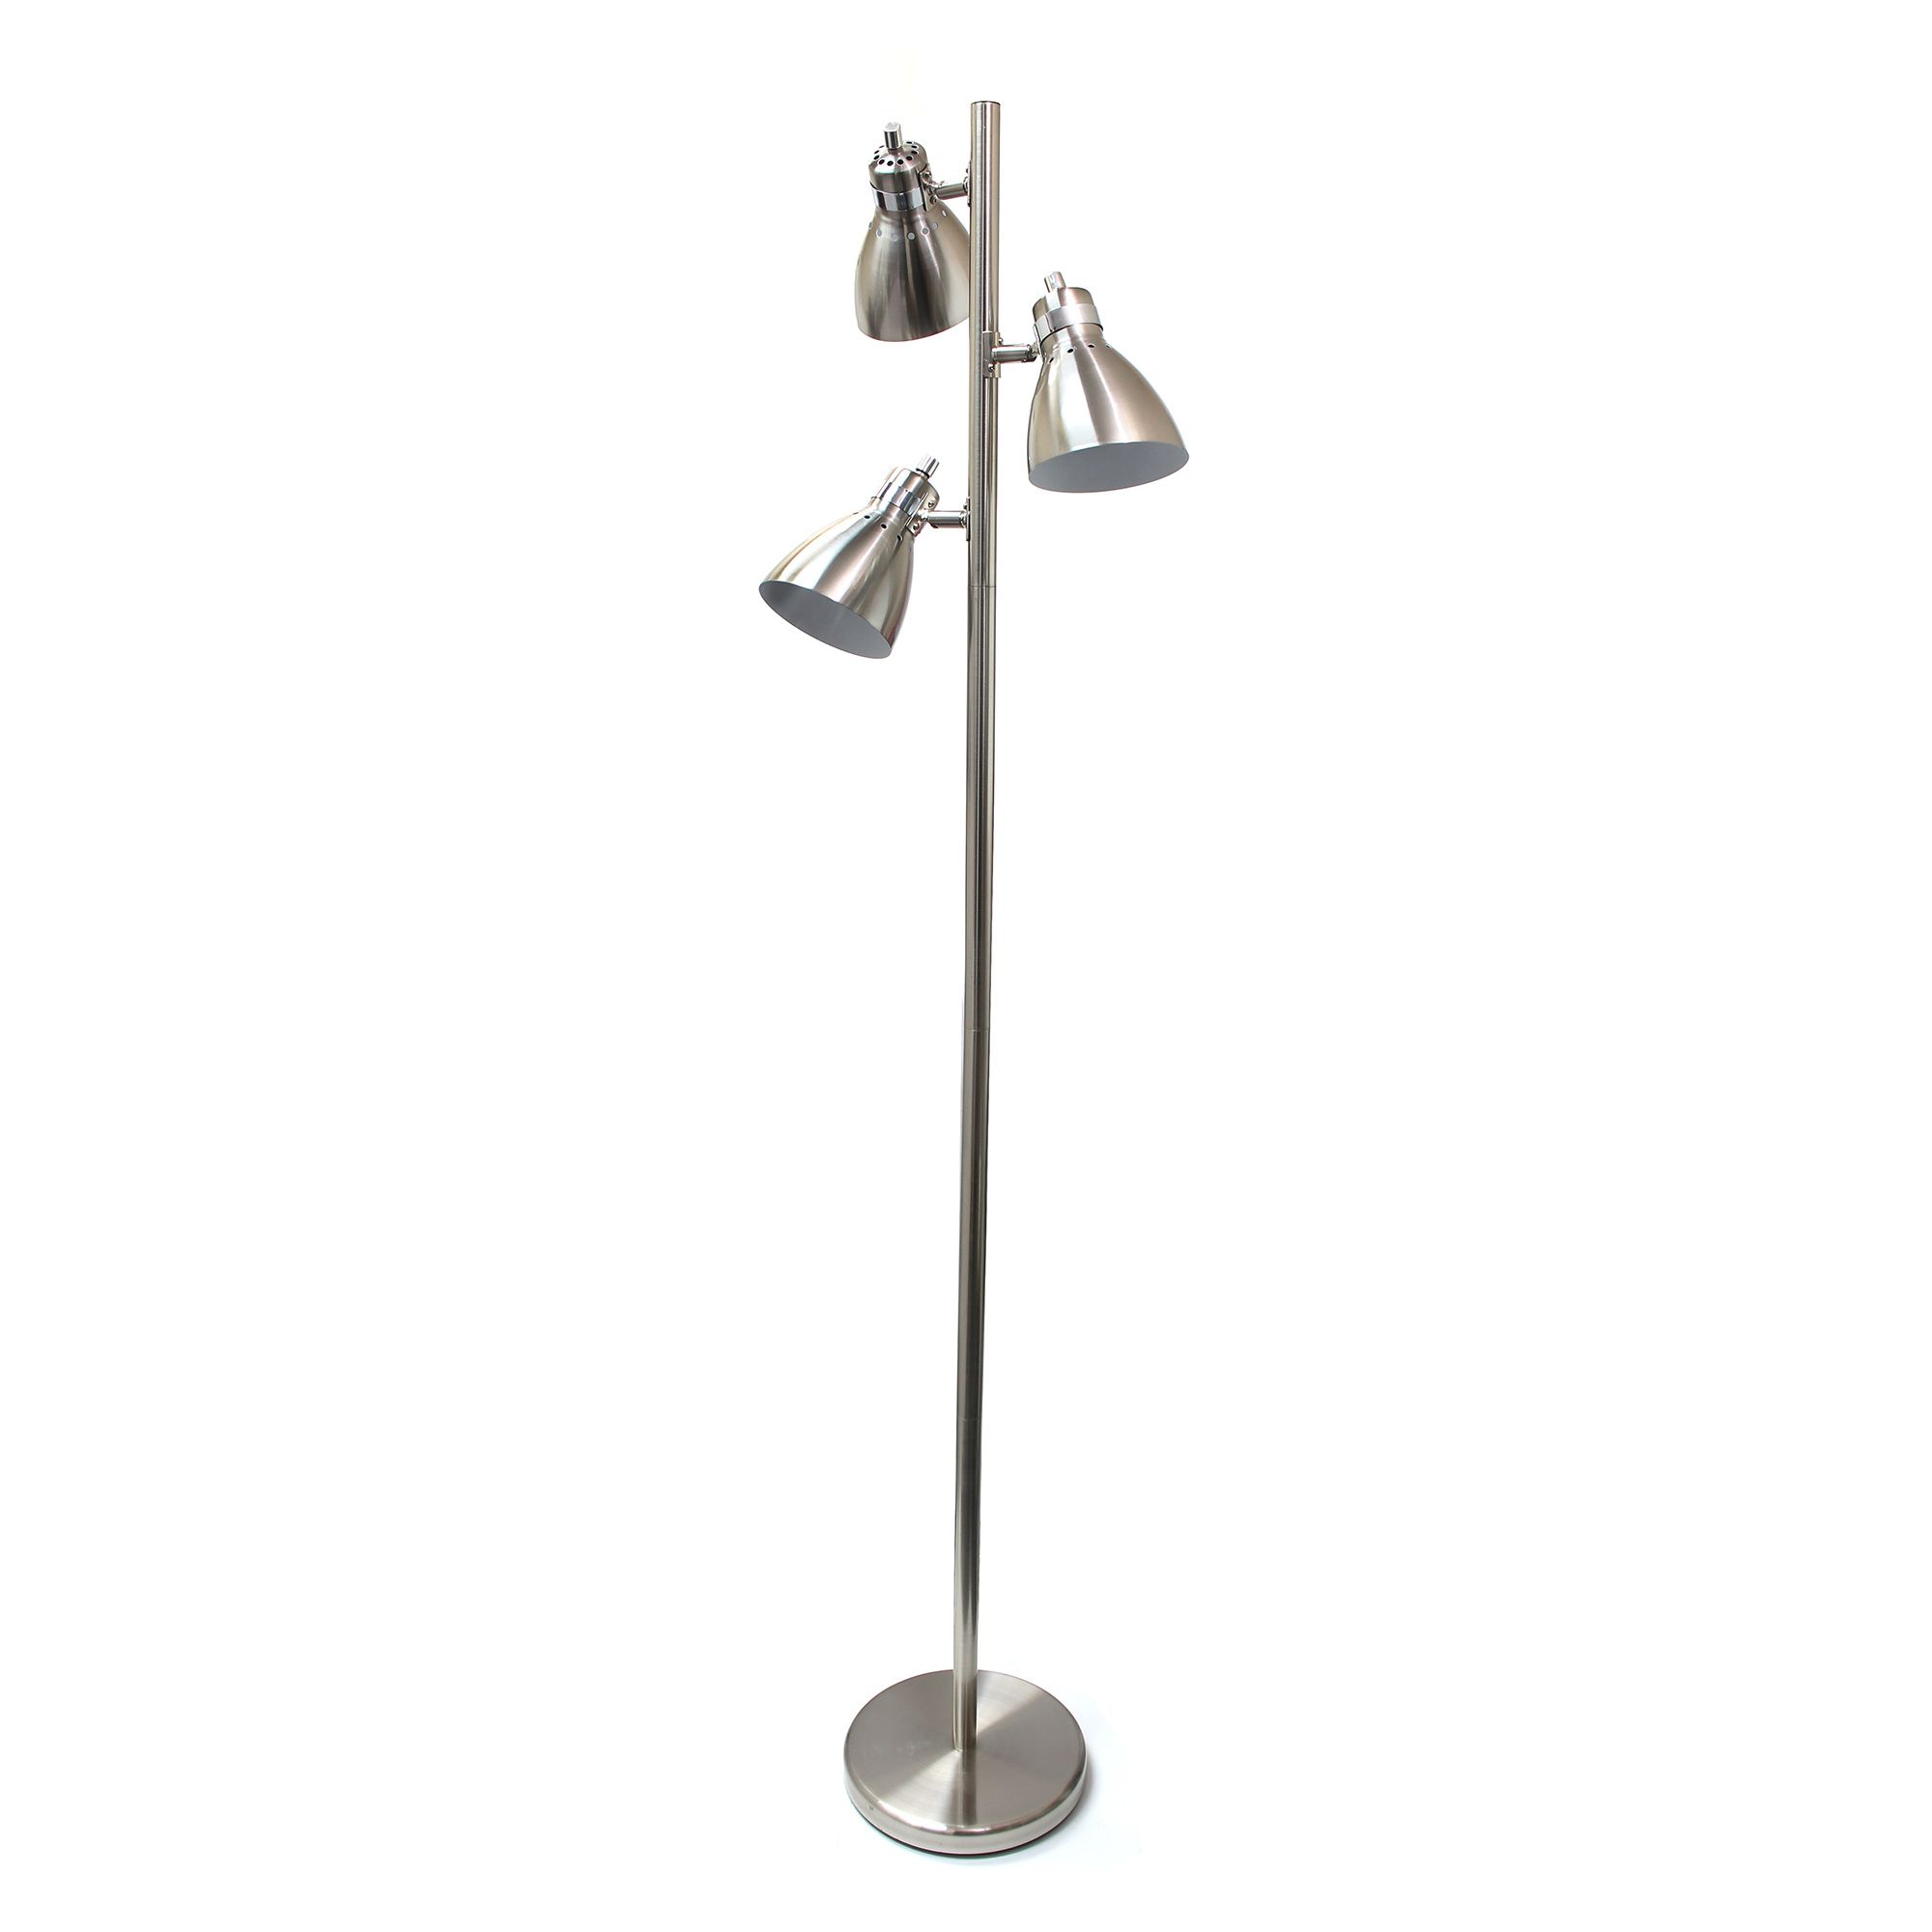 Simple Designs Metal 3 Light Tree Floor Lamp, Brushed Nickel Finish | All  The Rages Throughout 3 Light Tree Floor Lamps (View 12 of 20)